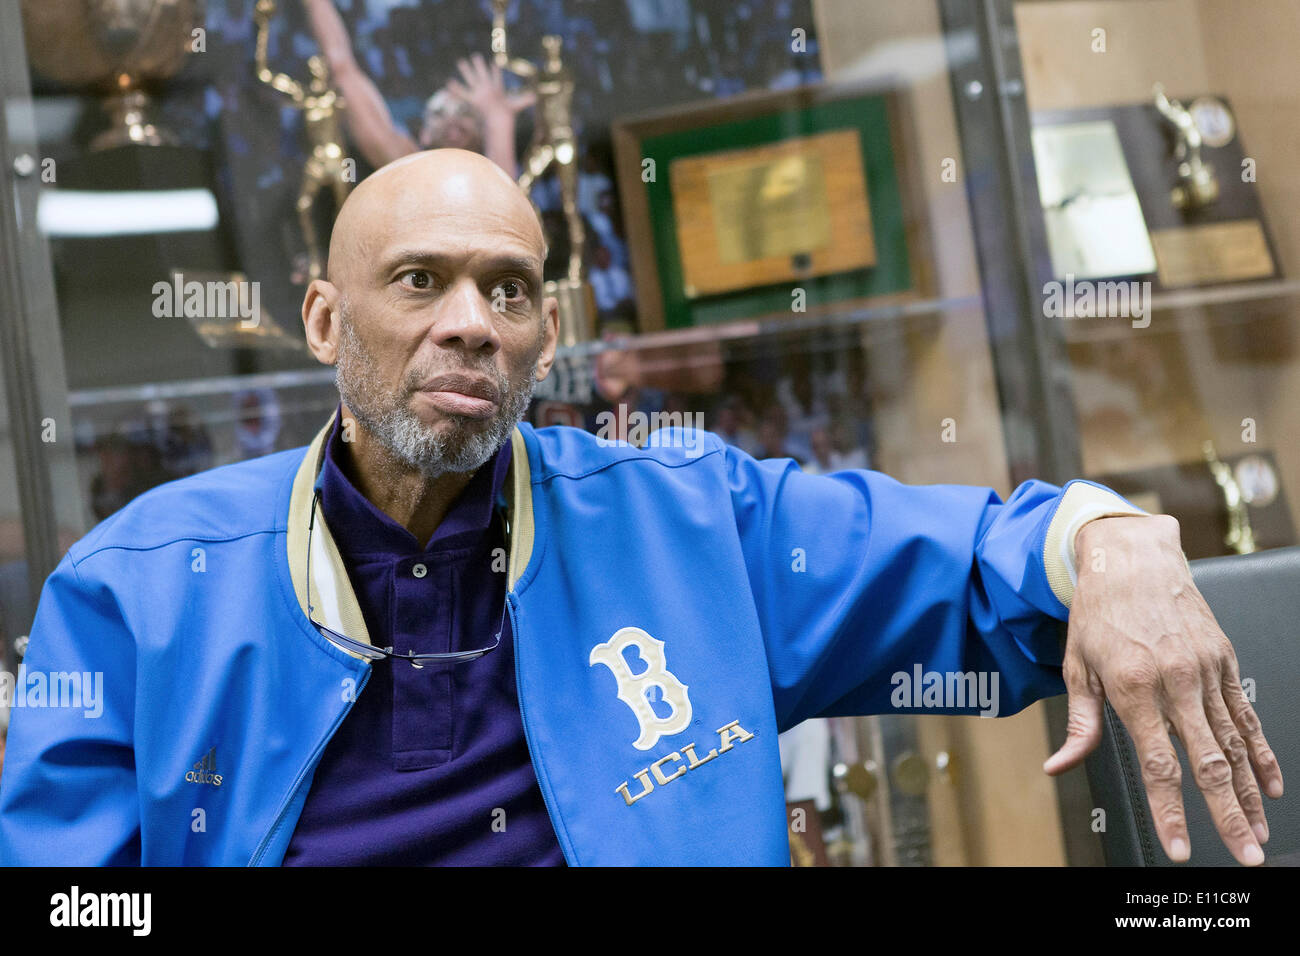 13.05.2014. Torrance, California, USA.  Kareem Abdul-Jabbar at a personal photoshoot in the Los Angeles area of Torrance. Stock Photo